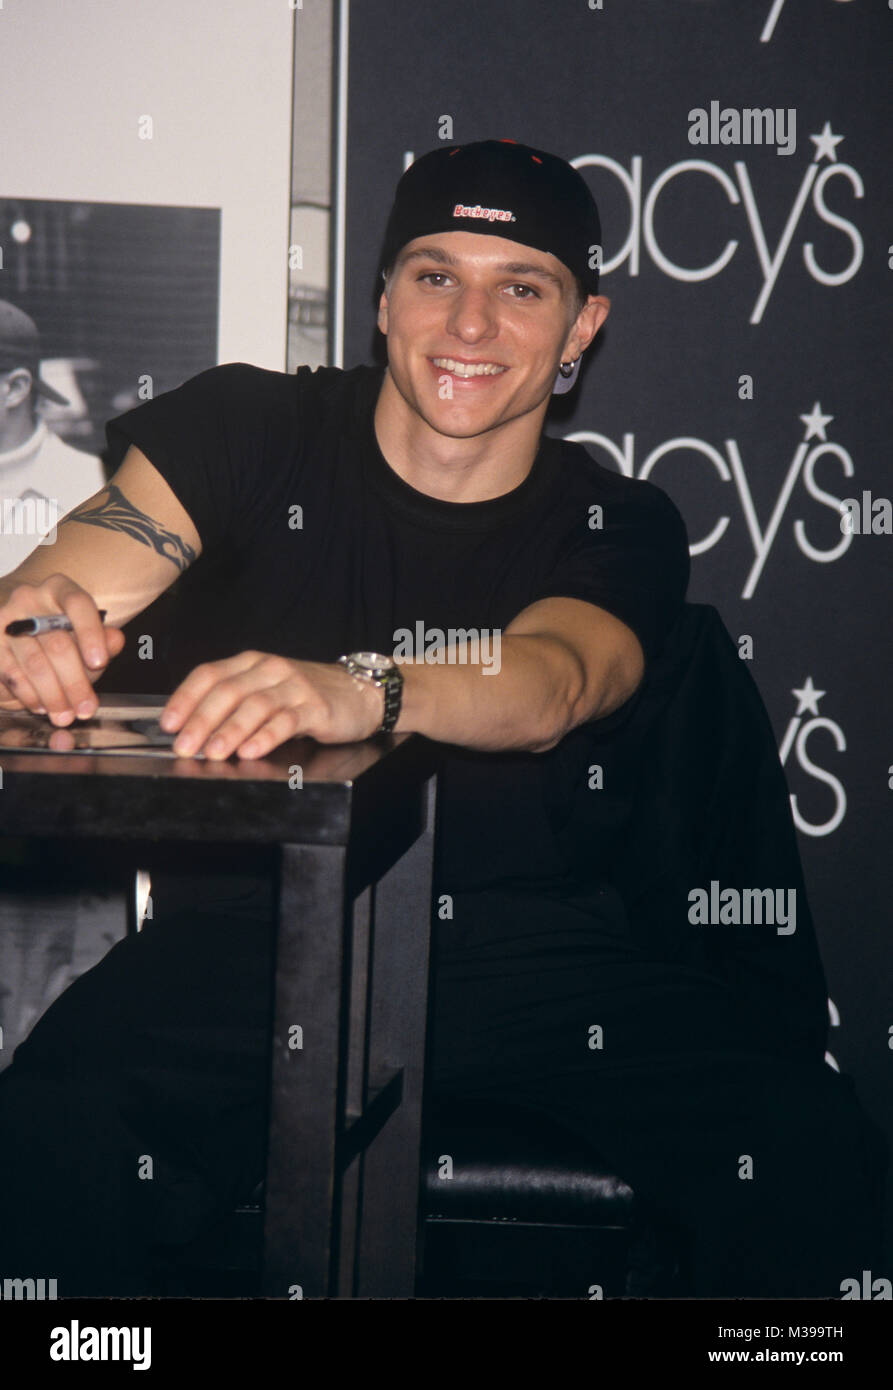 https://c8.alamy.com/comp/M399TH/drew-lachey-of-98-degrees-at-an-autograph-signing-at-macys-in-new-M399TH.jpg